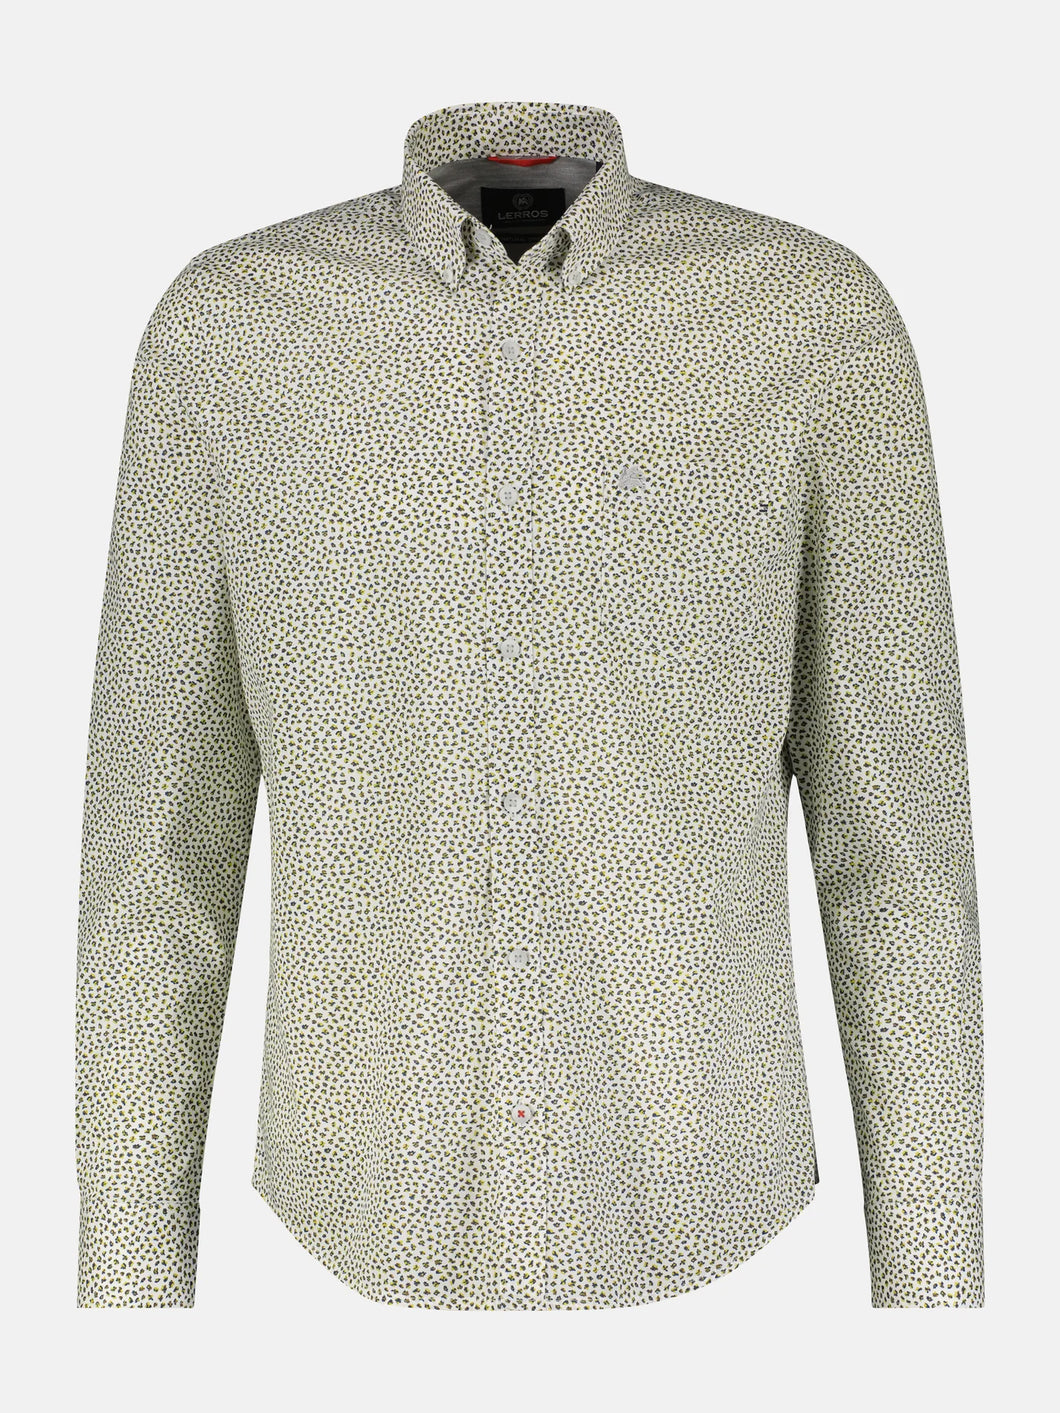 Lerros green and white floral patterned shirt